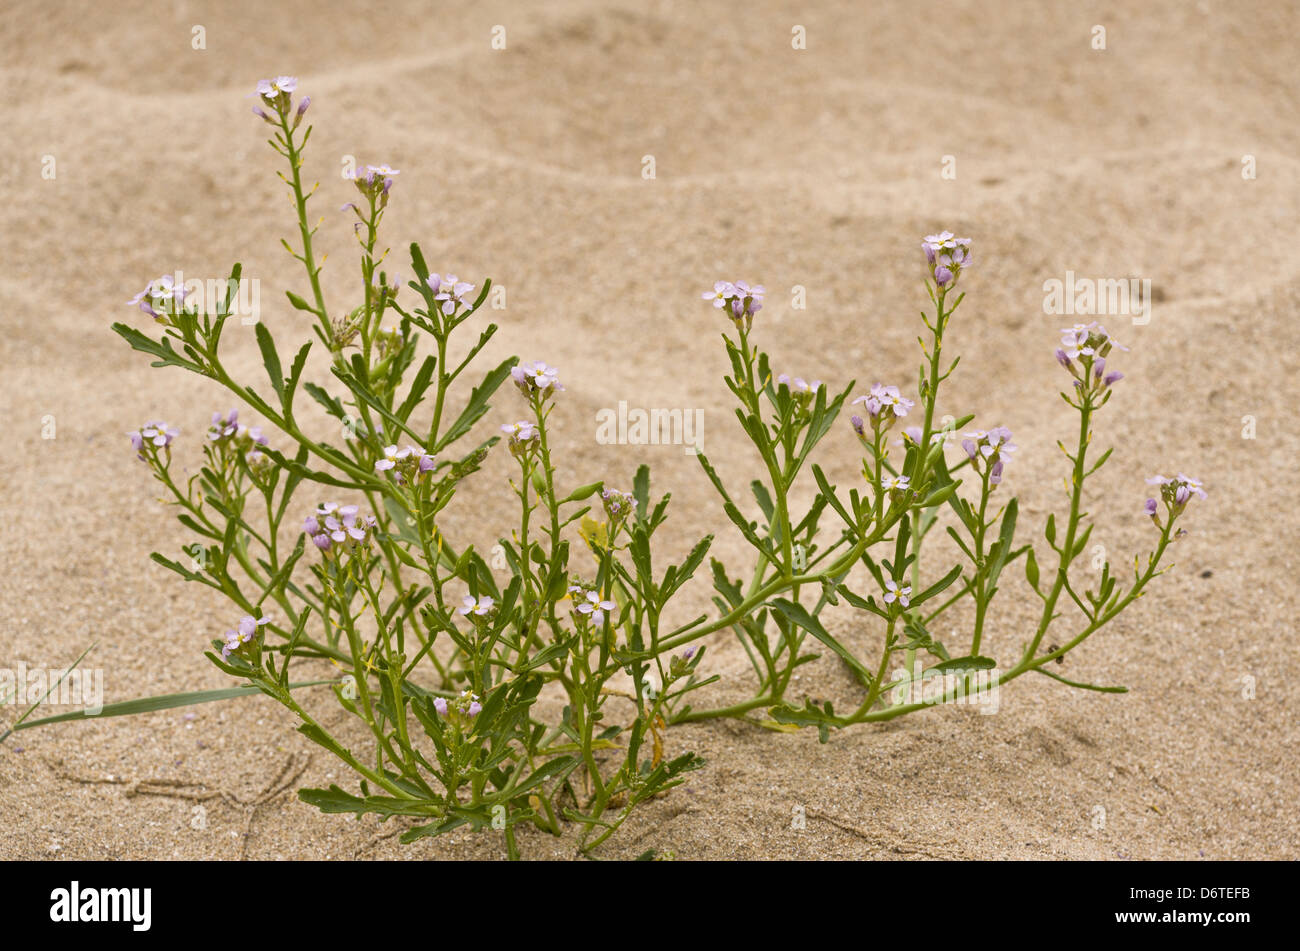 Sea Rocket (Cakile maritima ssp. integrifolia) in flower and fruit, growing on sand dunes, August Stock Photo